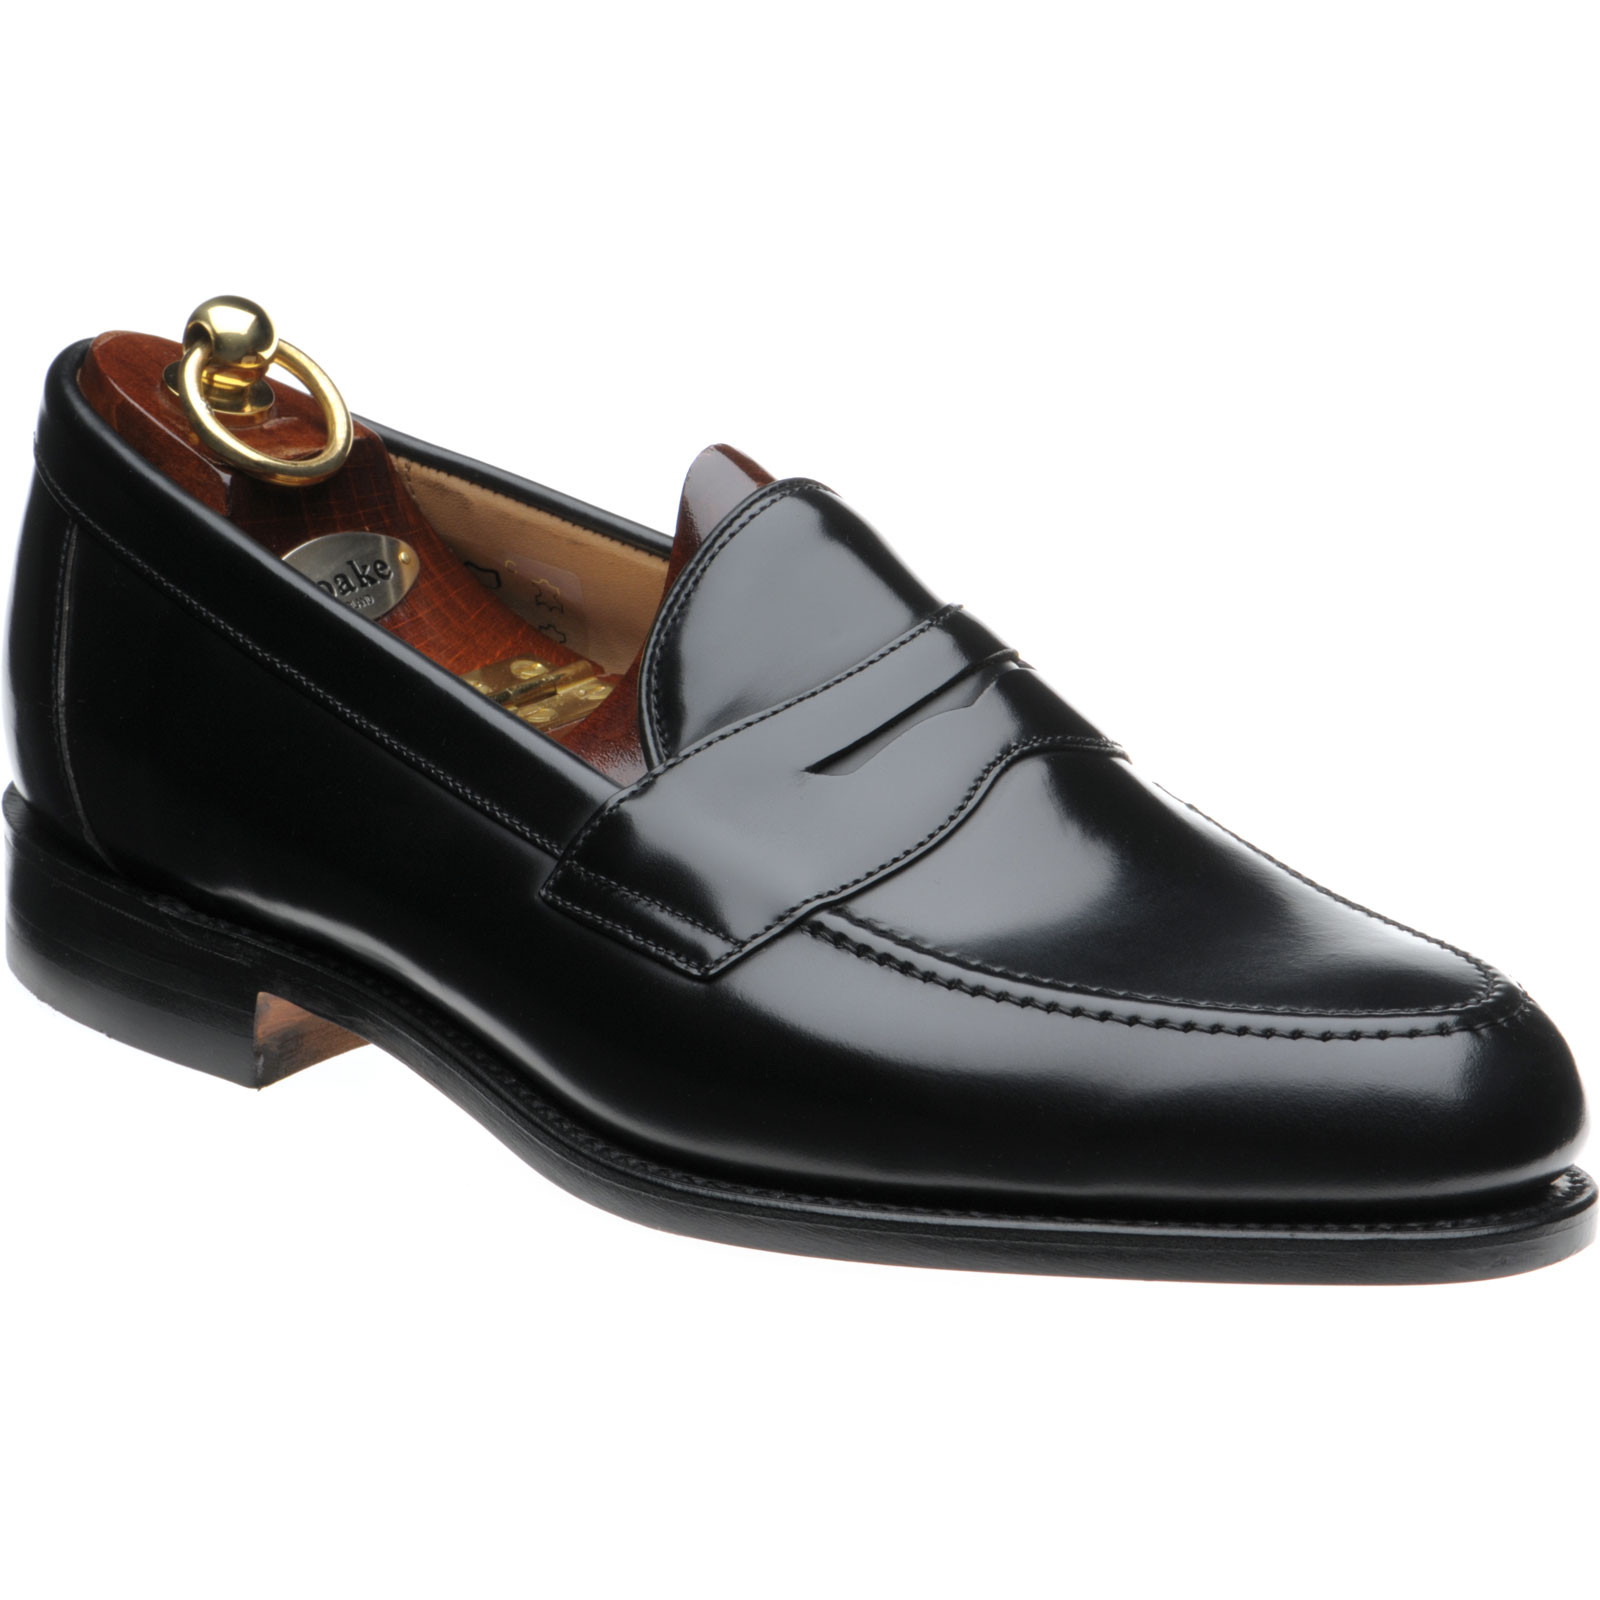 Loake shoes | Loake Professional | Imperial in Black Polished at ...